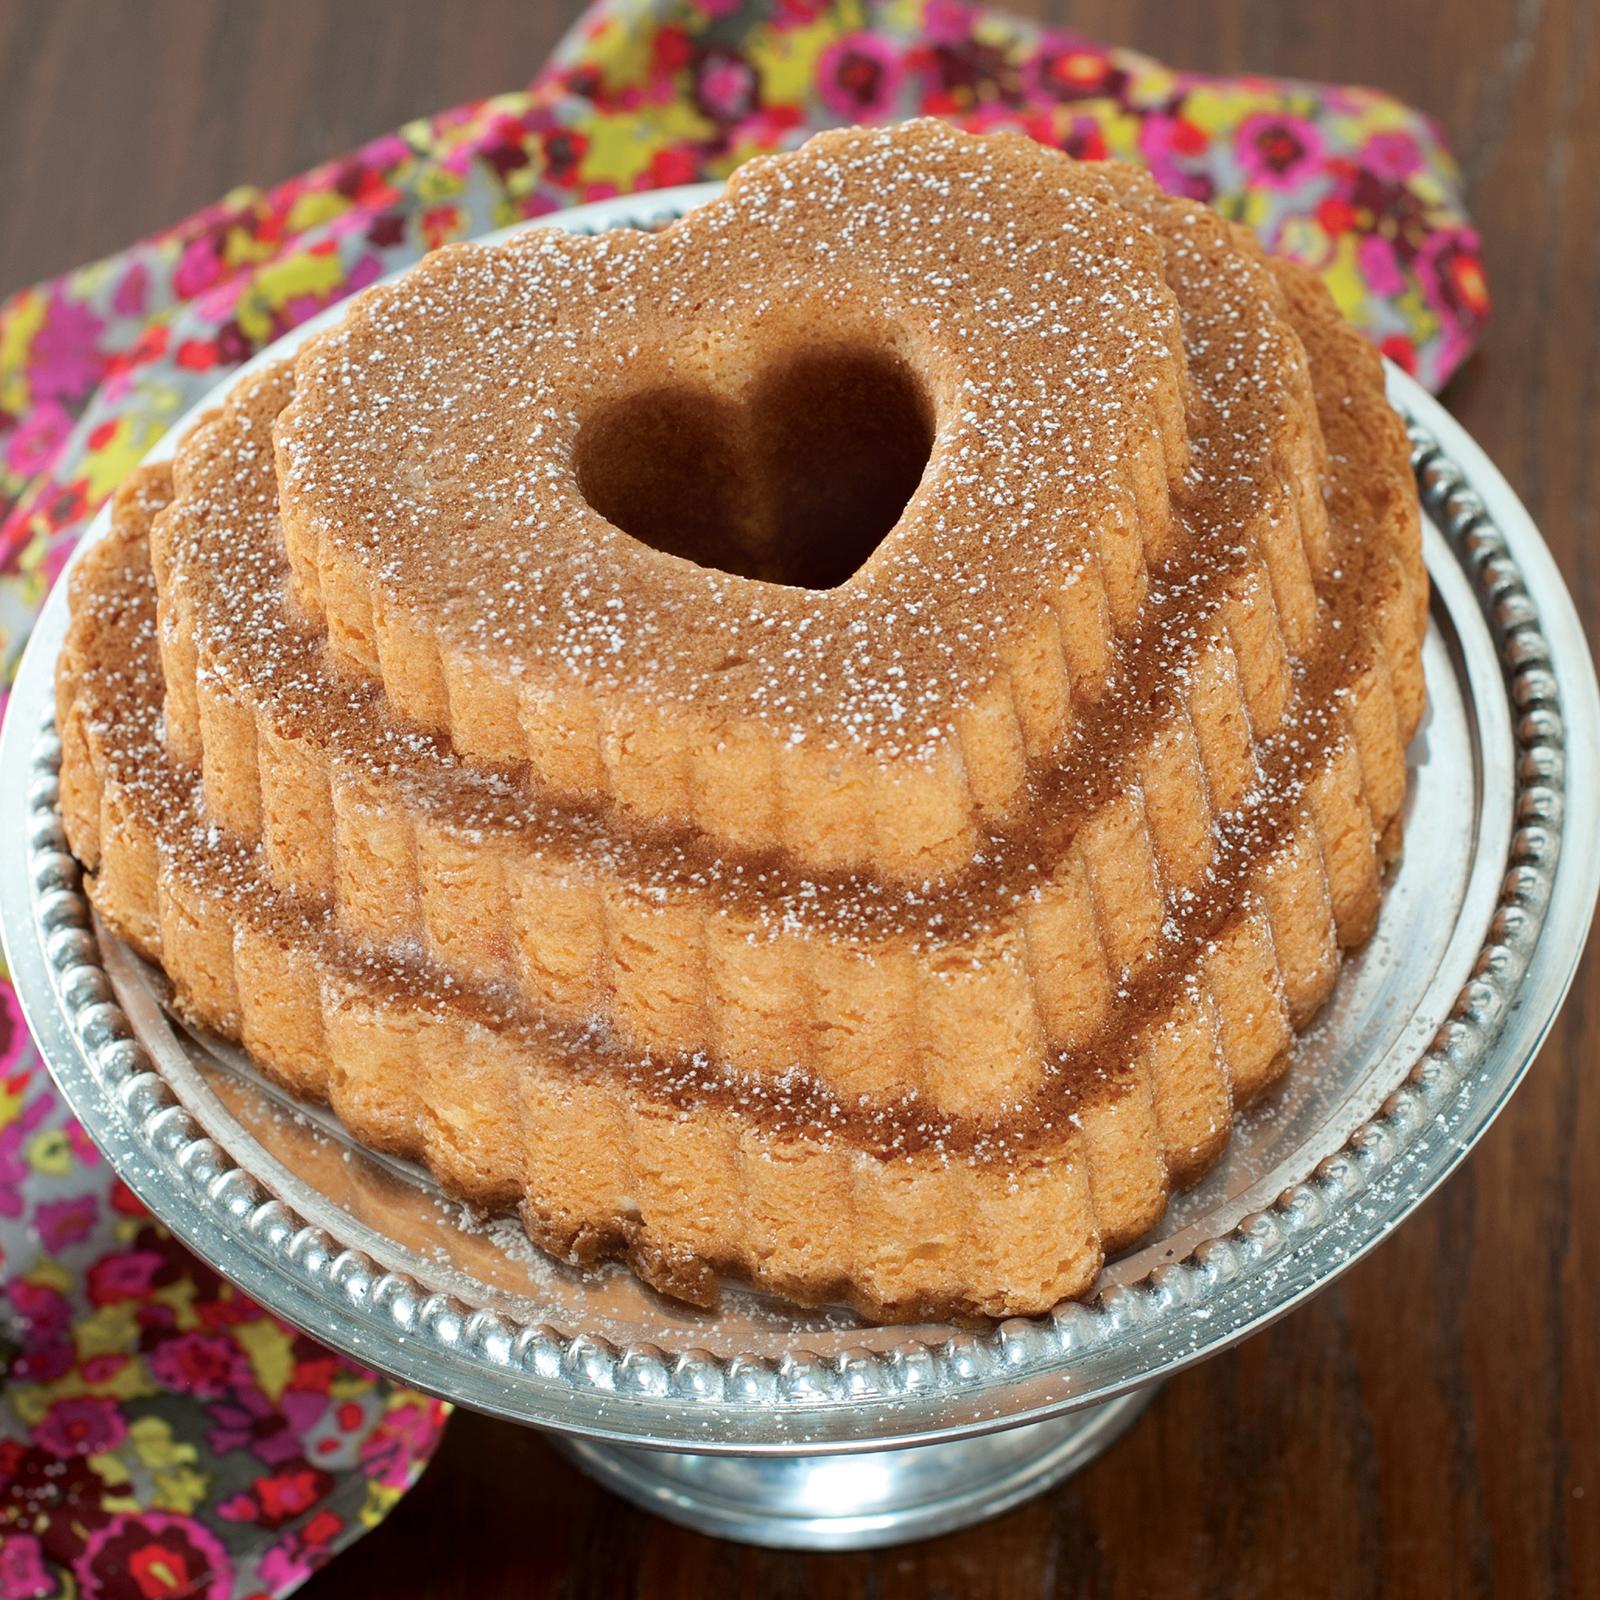 Nordic Ware's Heart-Shaped Bundt Pans for Valentine's Day